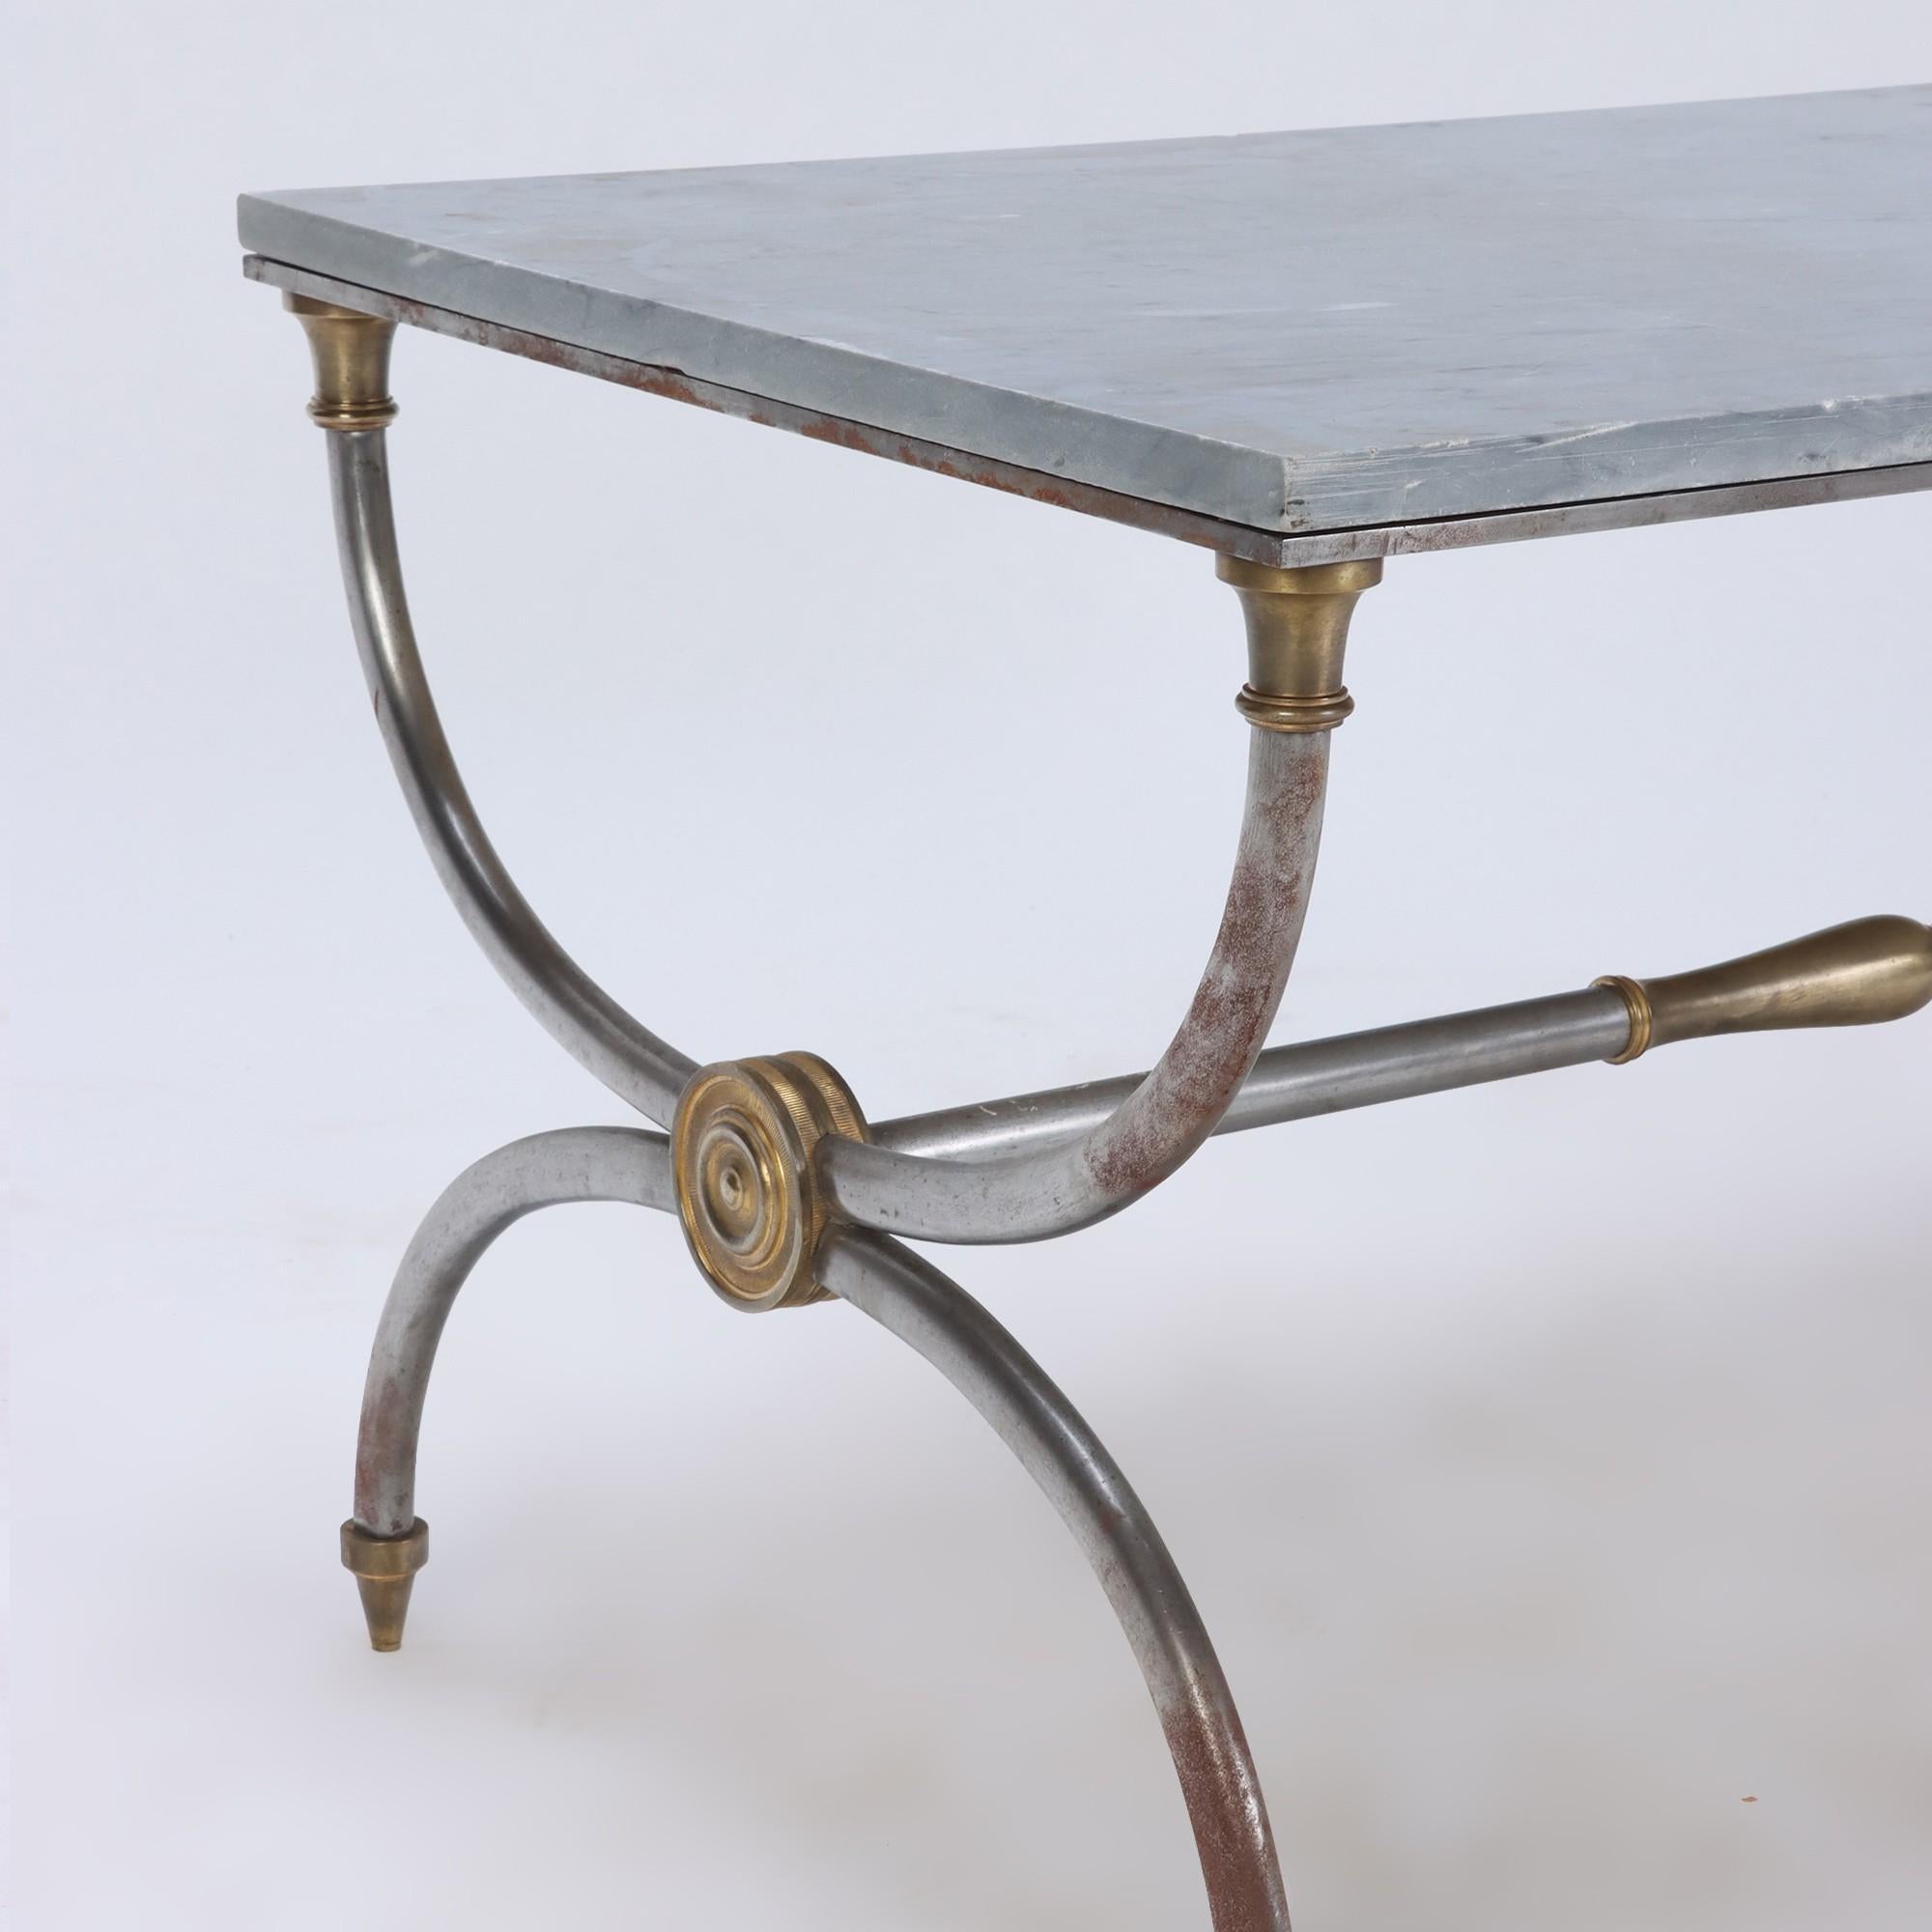 Empire Two-Tone Bronze and Steel Coffee Table with Marble Top, Jansen C 1950